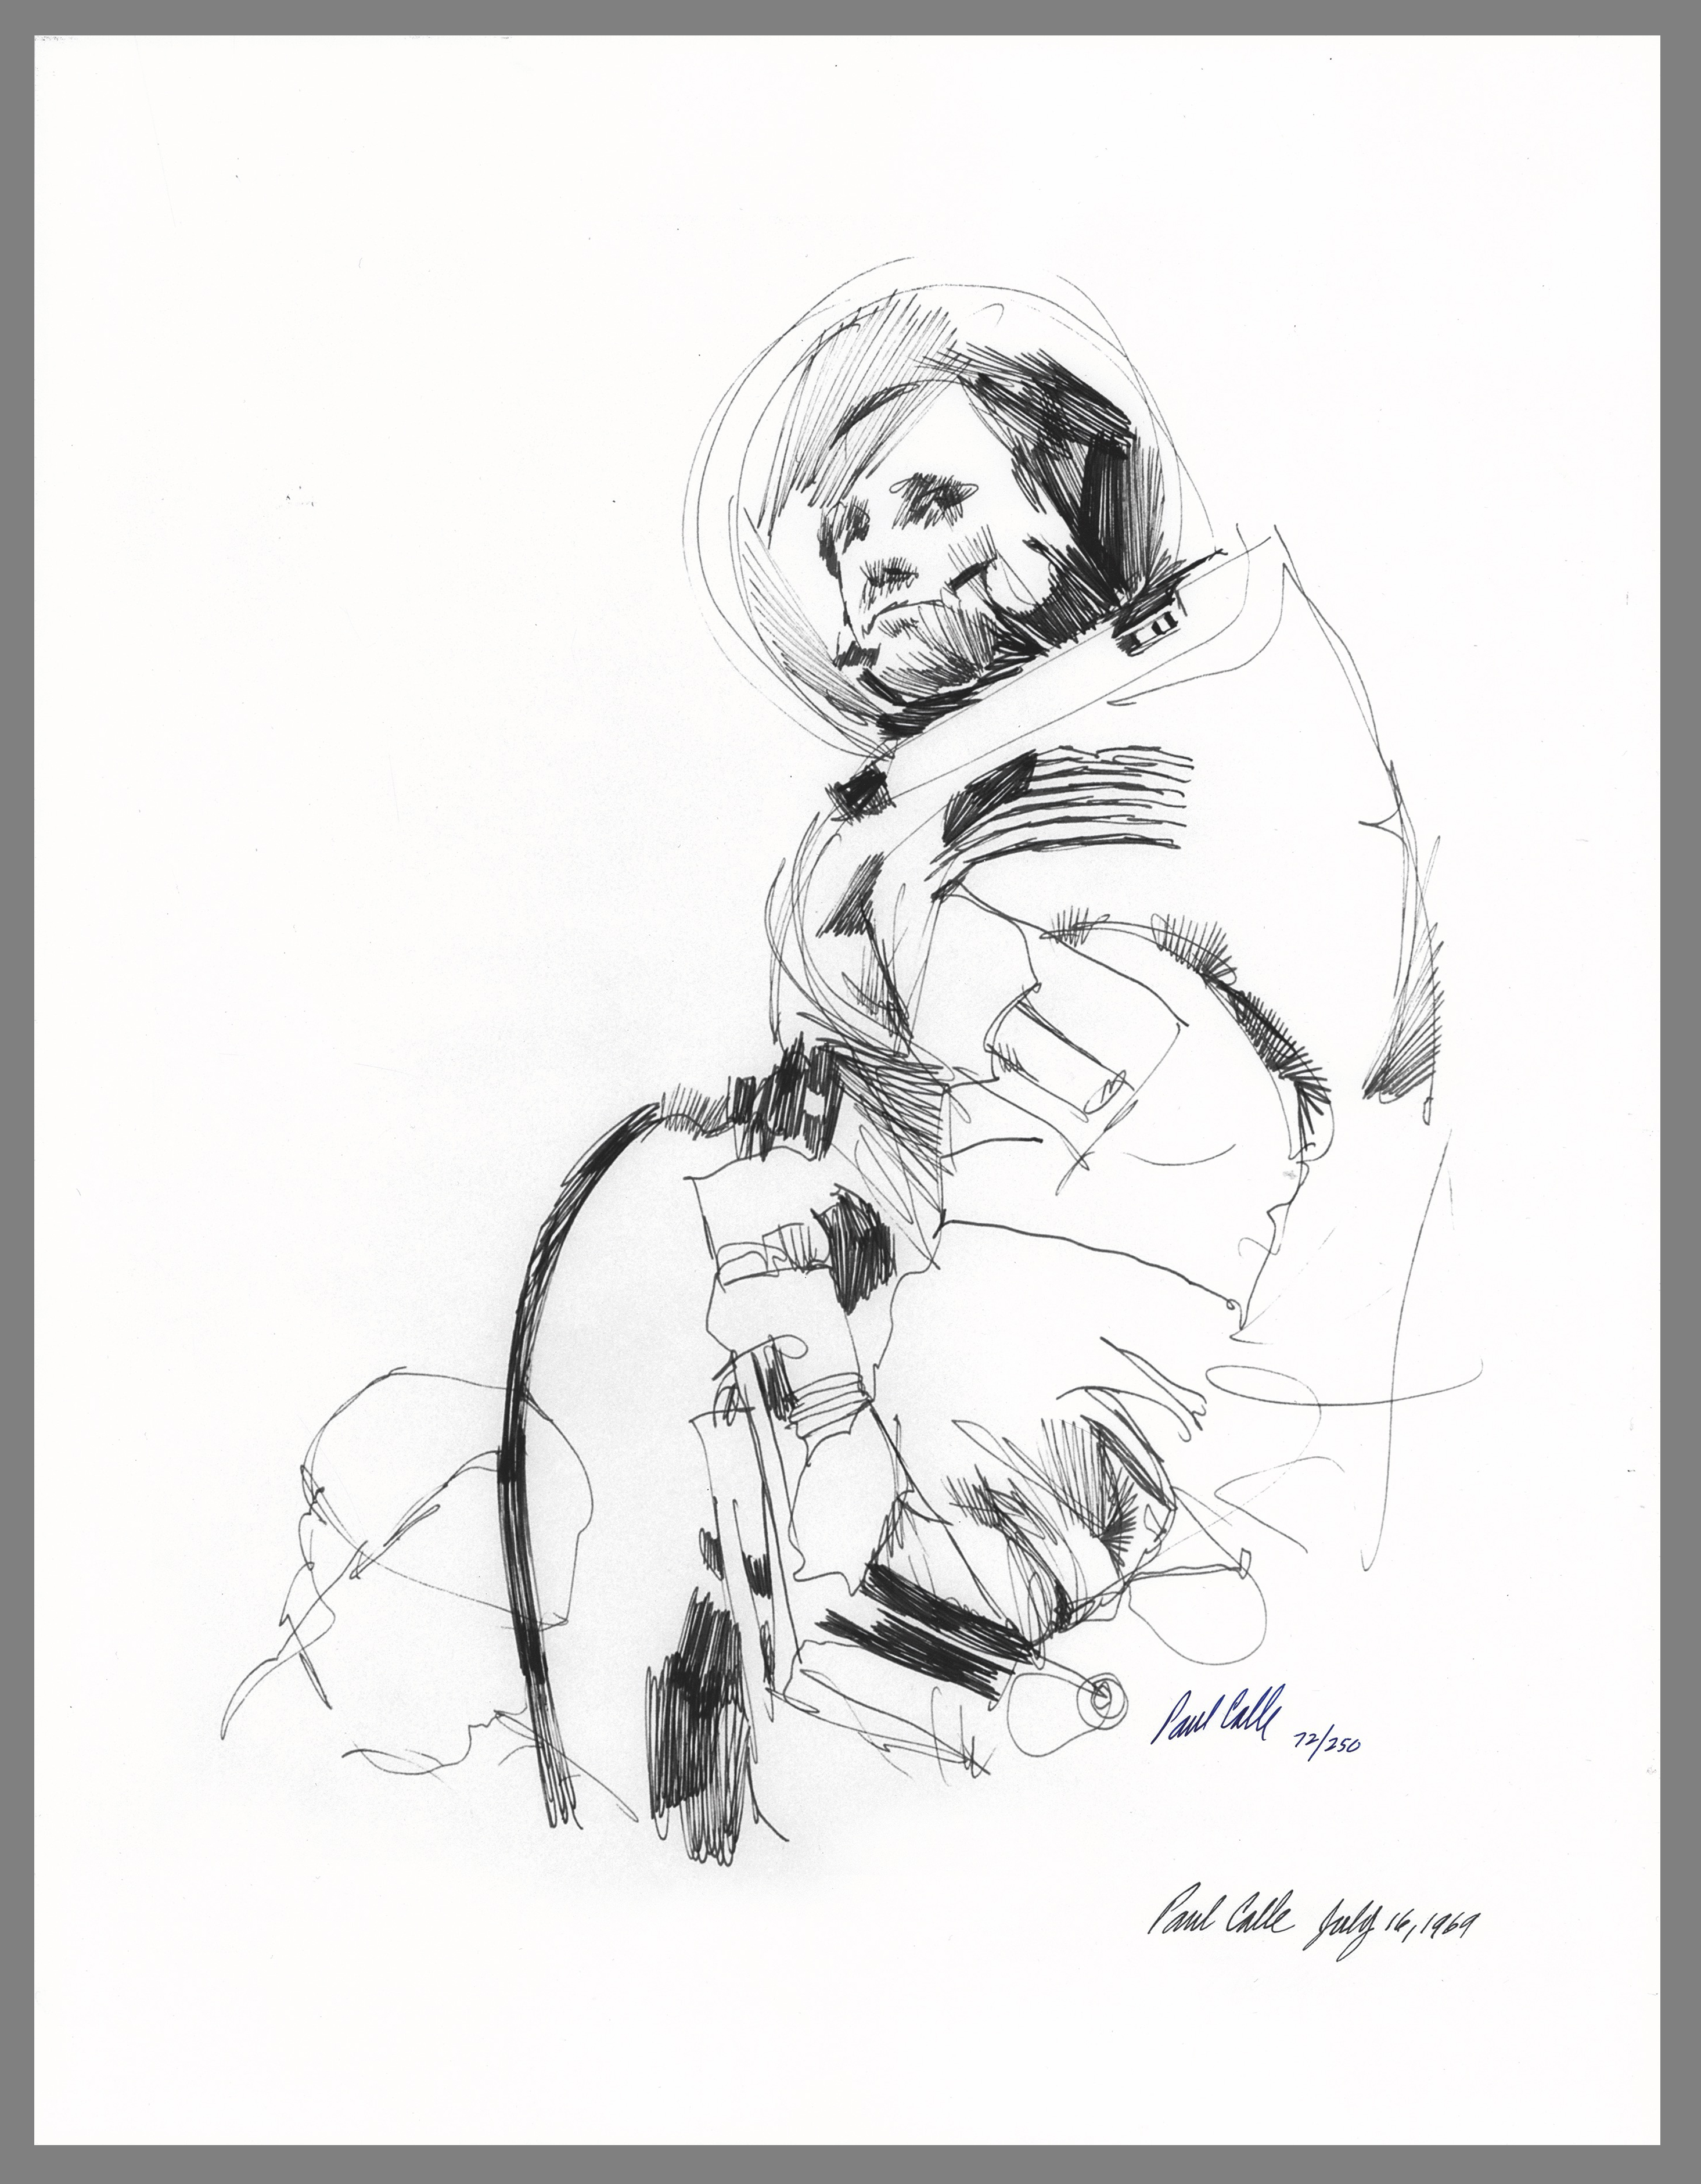 Lot #438 Paul Calle Signed Limited Edition Print - 'Neil Armstrong' - Image 1